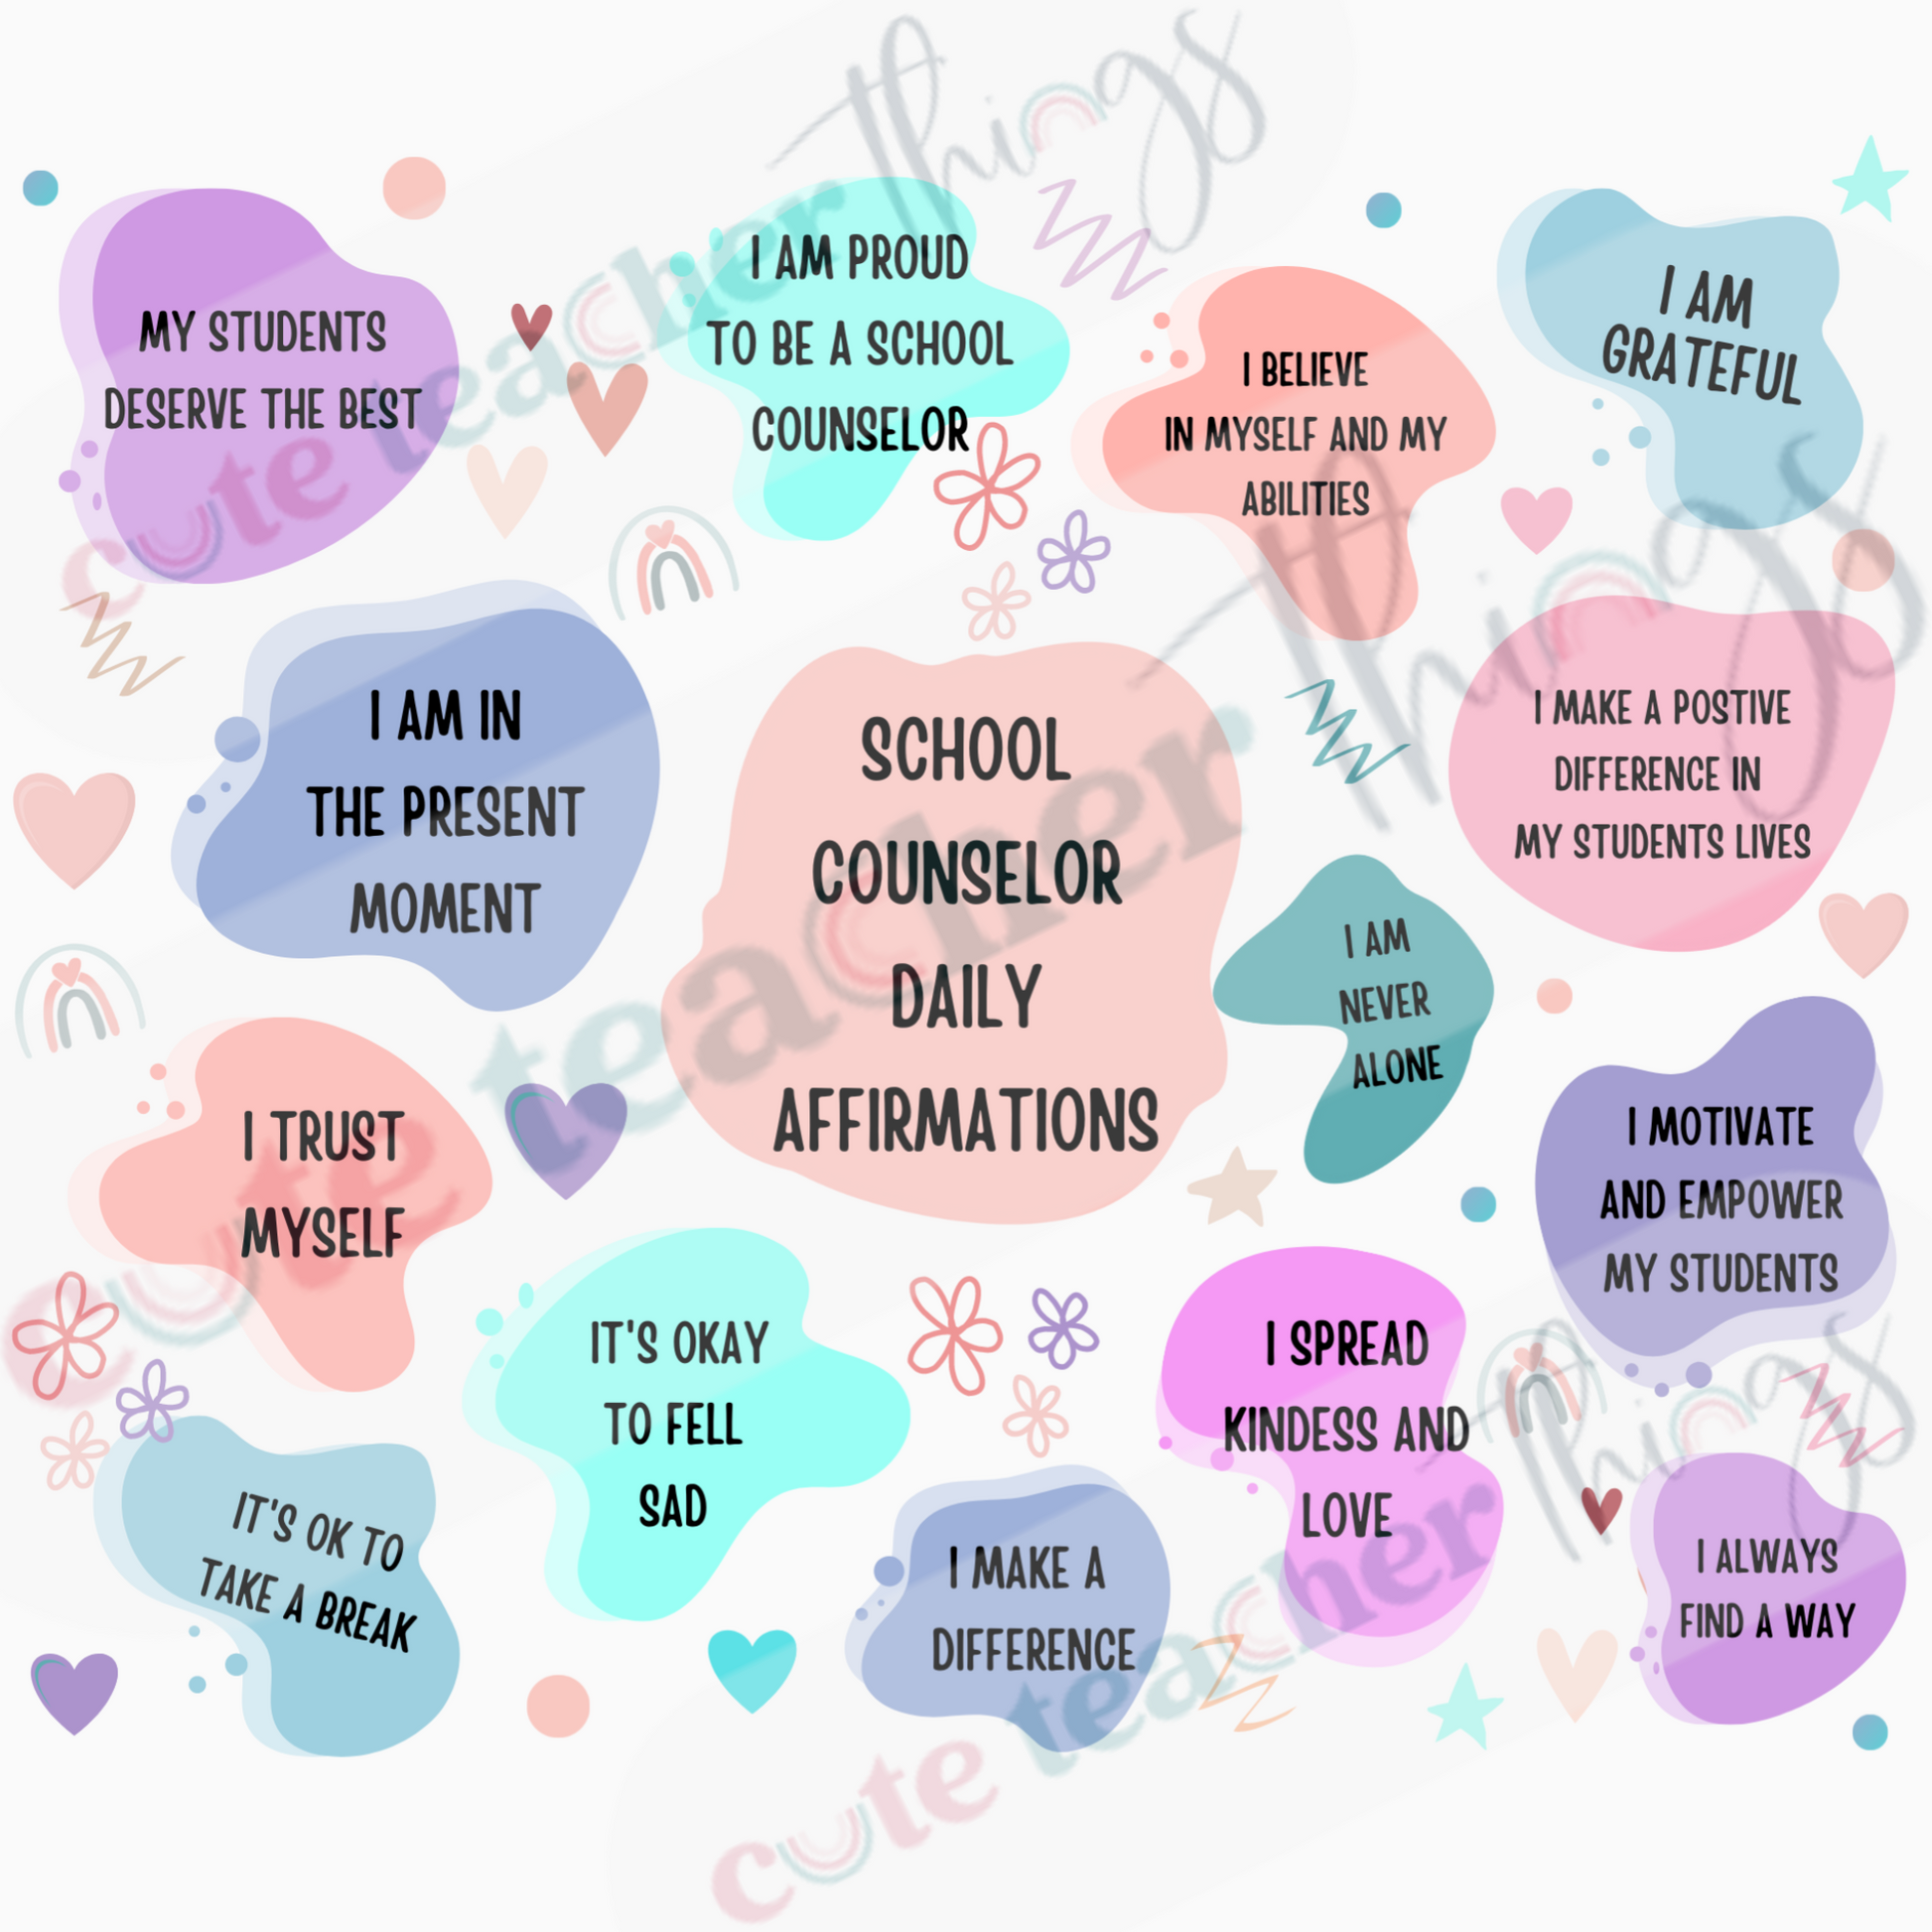 school counselor daily affirmations design